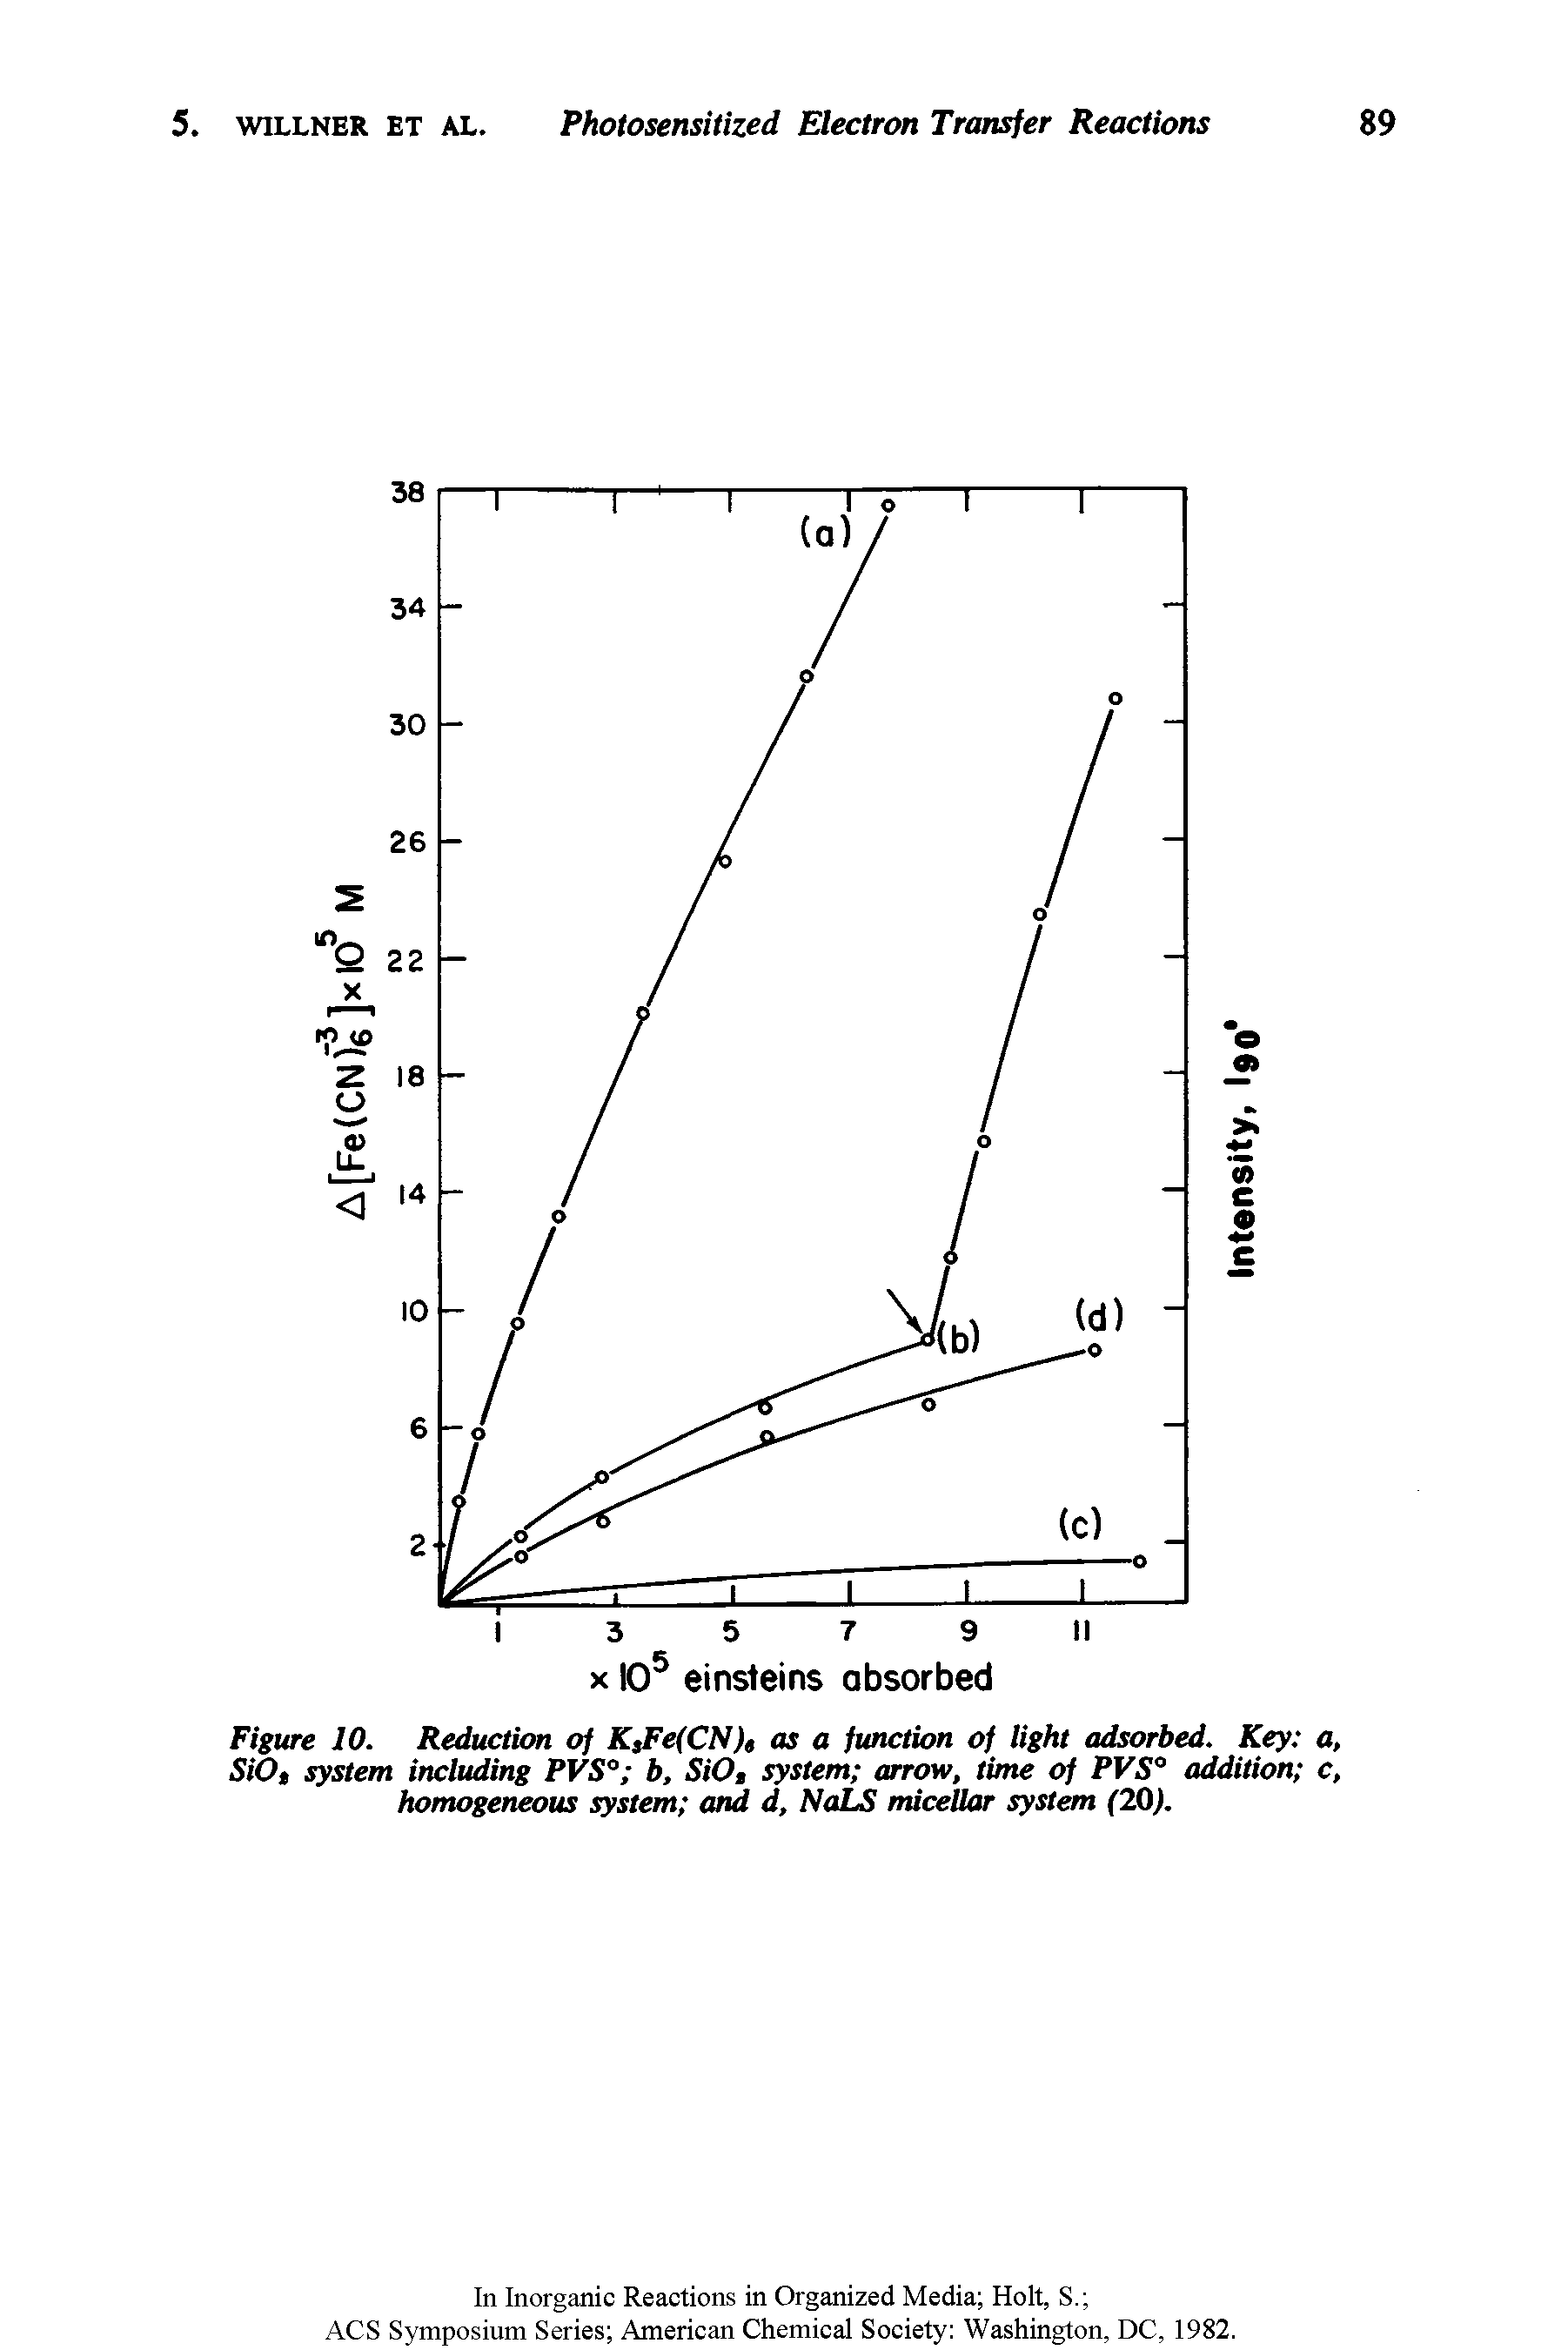 Figure 10. Reduction of KsFe(CN)t as a function of light adsorbed. Key a, SiOt system including PVS° b, SiO, system arrow, time of PVS° addition c, homogeneous system and d, NaLS micellar system (20).